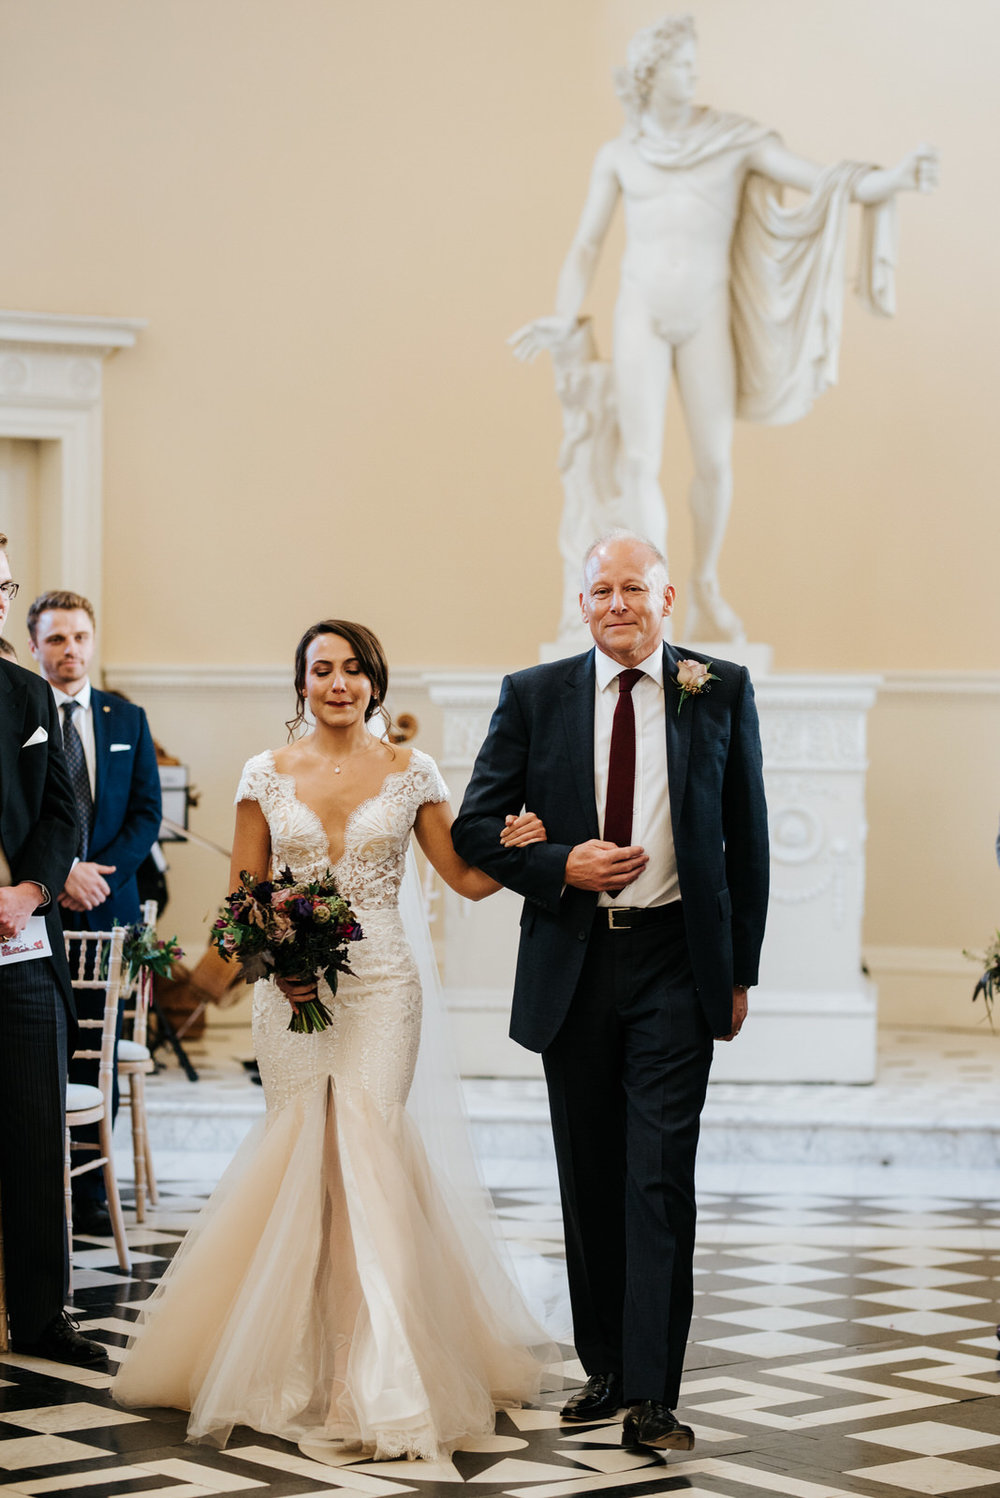 Bride about to start crying as she walks down aisle with step-dad